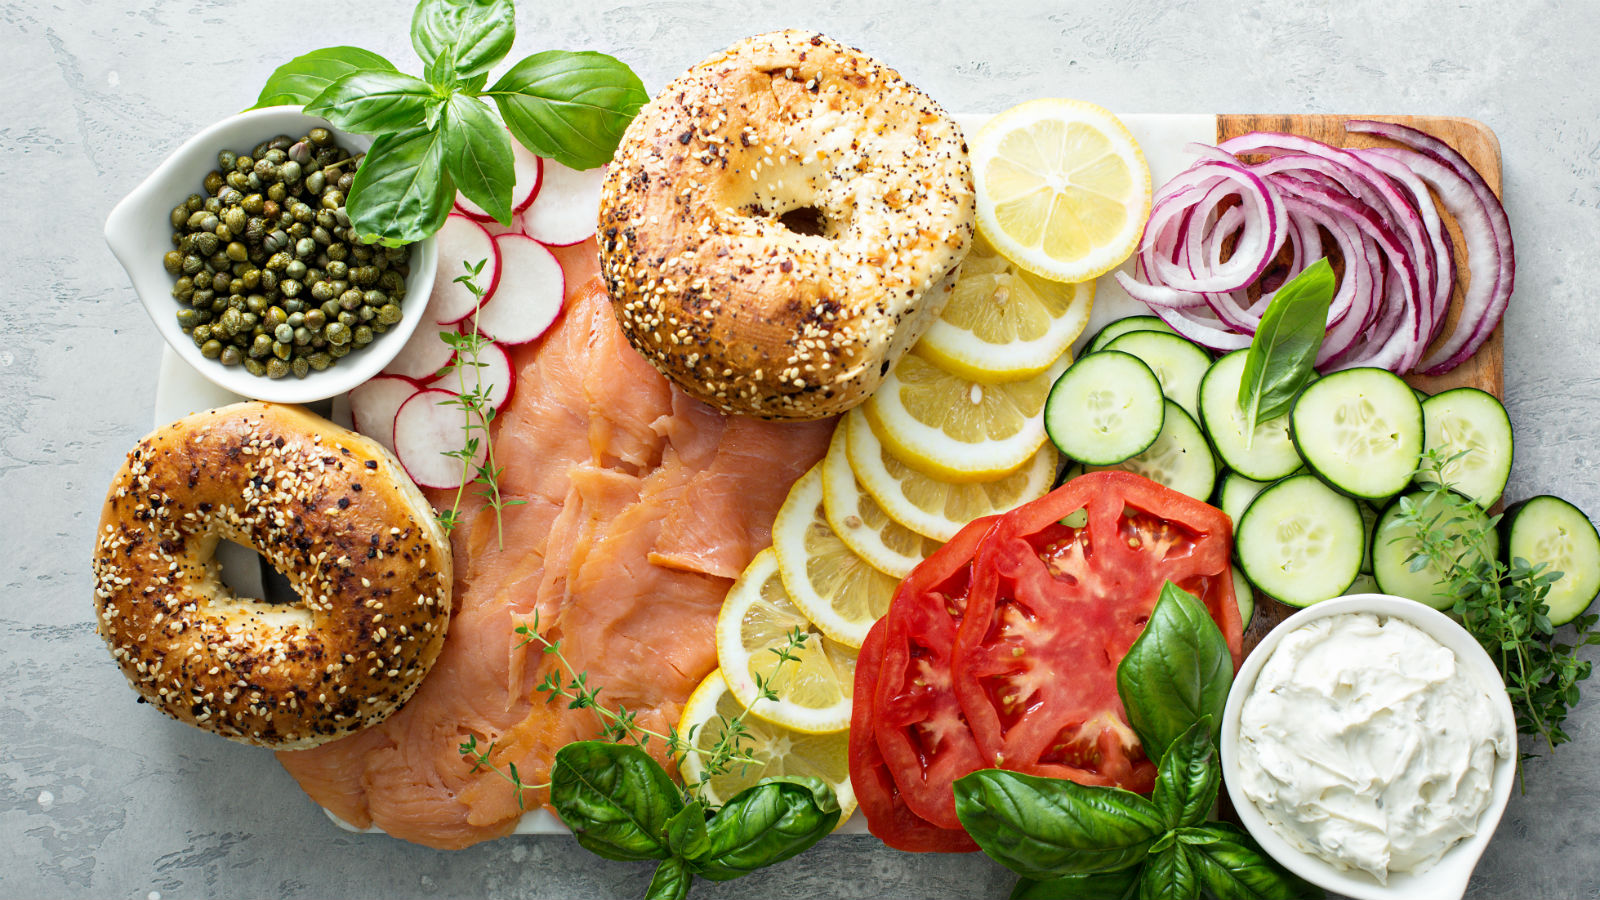 Bagel board with salmon, capers, cream cheese, lemons, vegetables